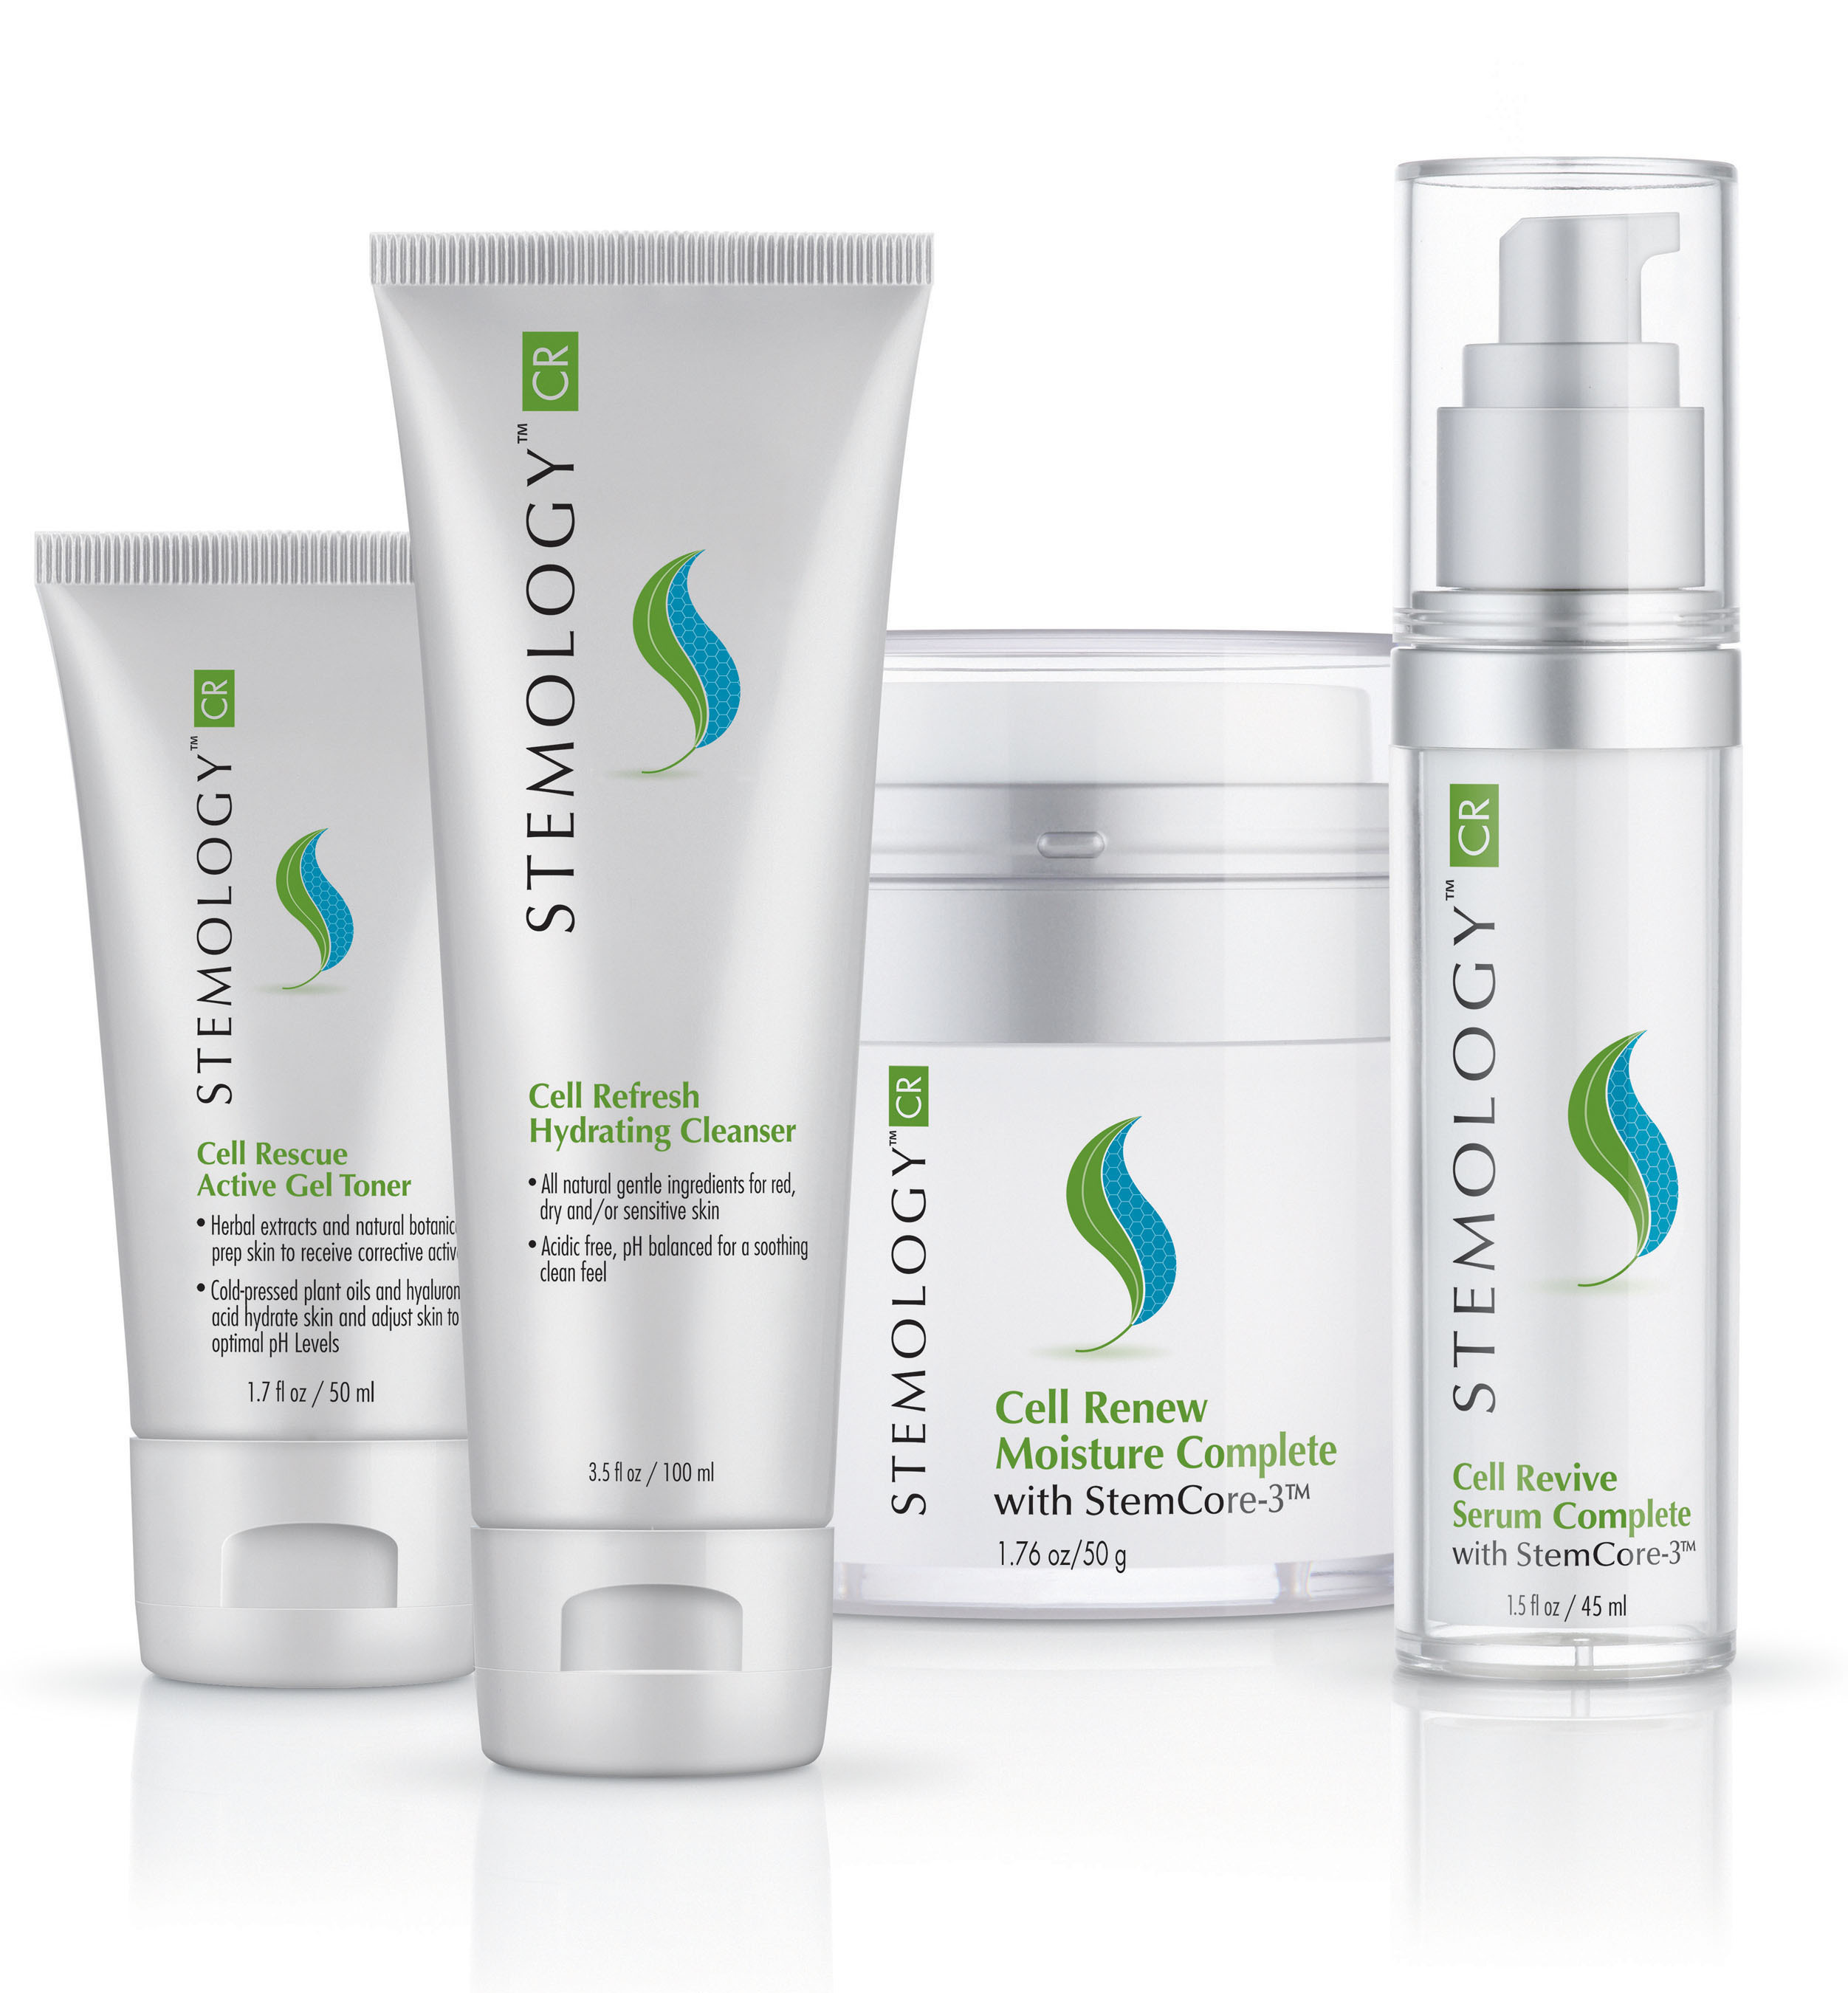 Stemology Skincare, the world's first and only skincare line to use plant and human adult stem cell technology, launches. www.stemologyskincare.com. (PRNewsFoto/DermaTech Research Laboratories) (PRNewsFoto/DERMATECH RESEARCH LABORATORIES)